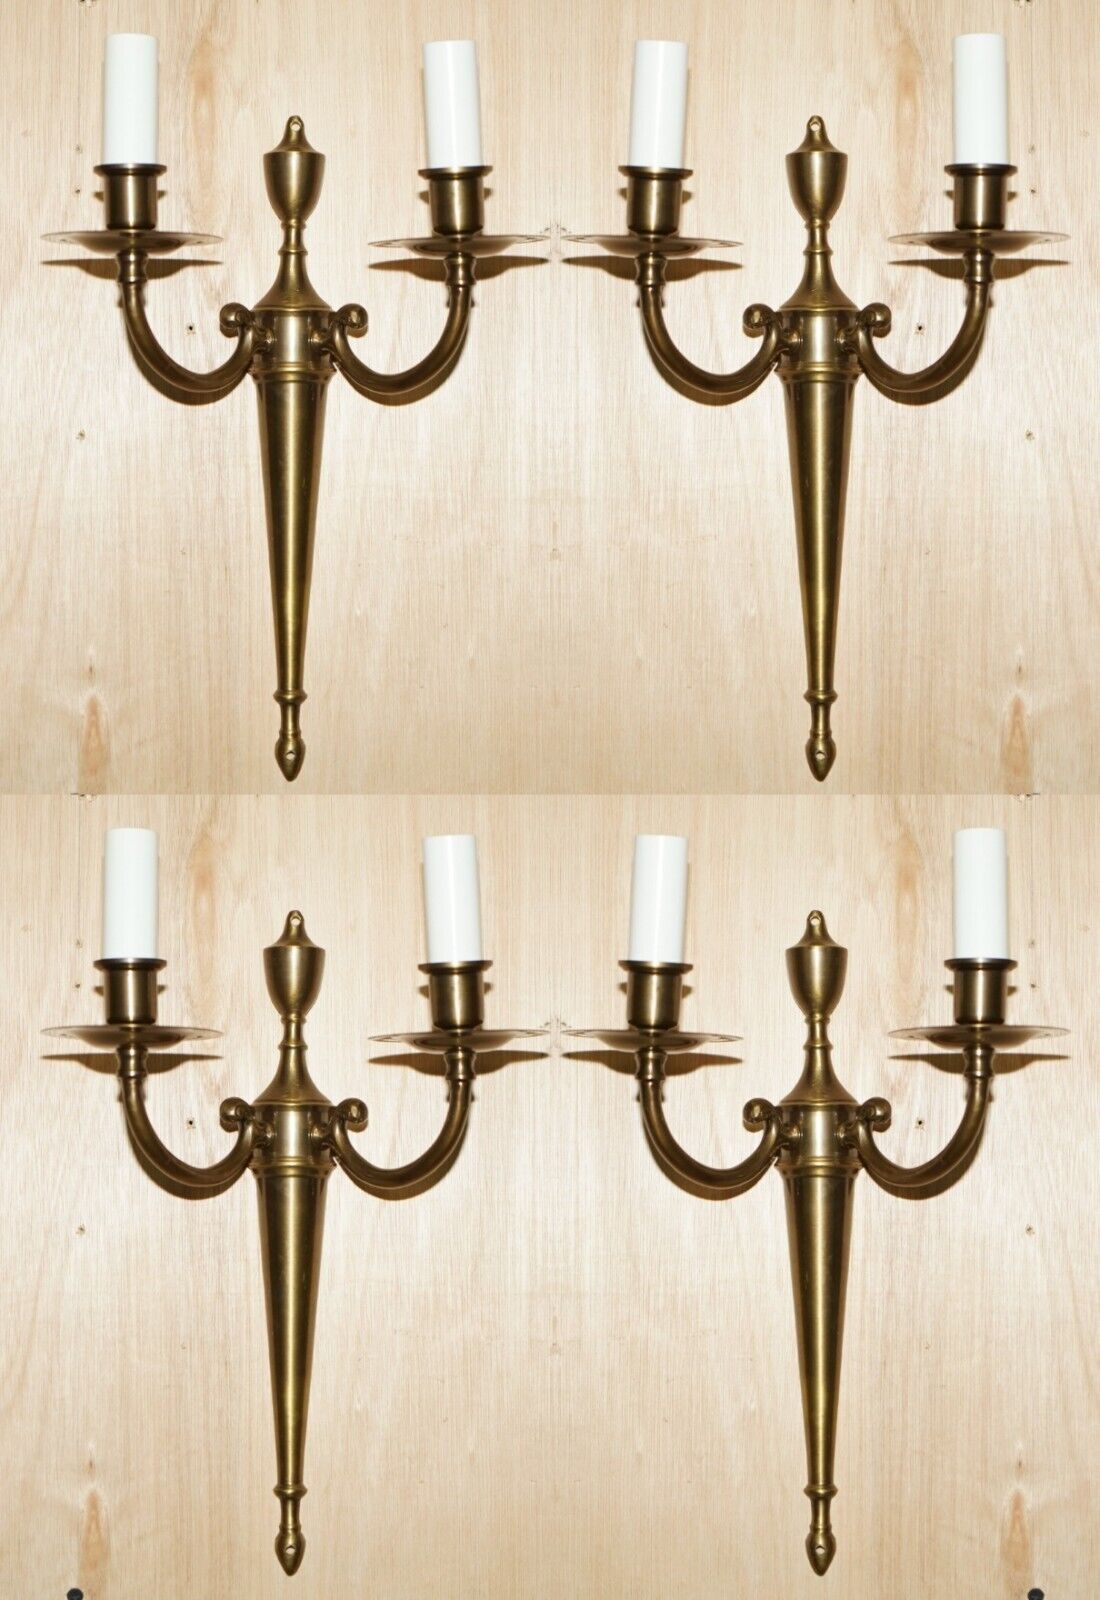 FOUR VINTAGE GILT BRASS TWIN BRANCH FRENCH WALL SCONCES LIGHTS WITH FAUX CANDLE